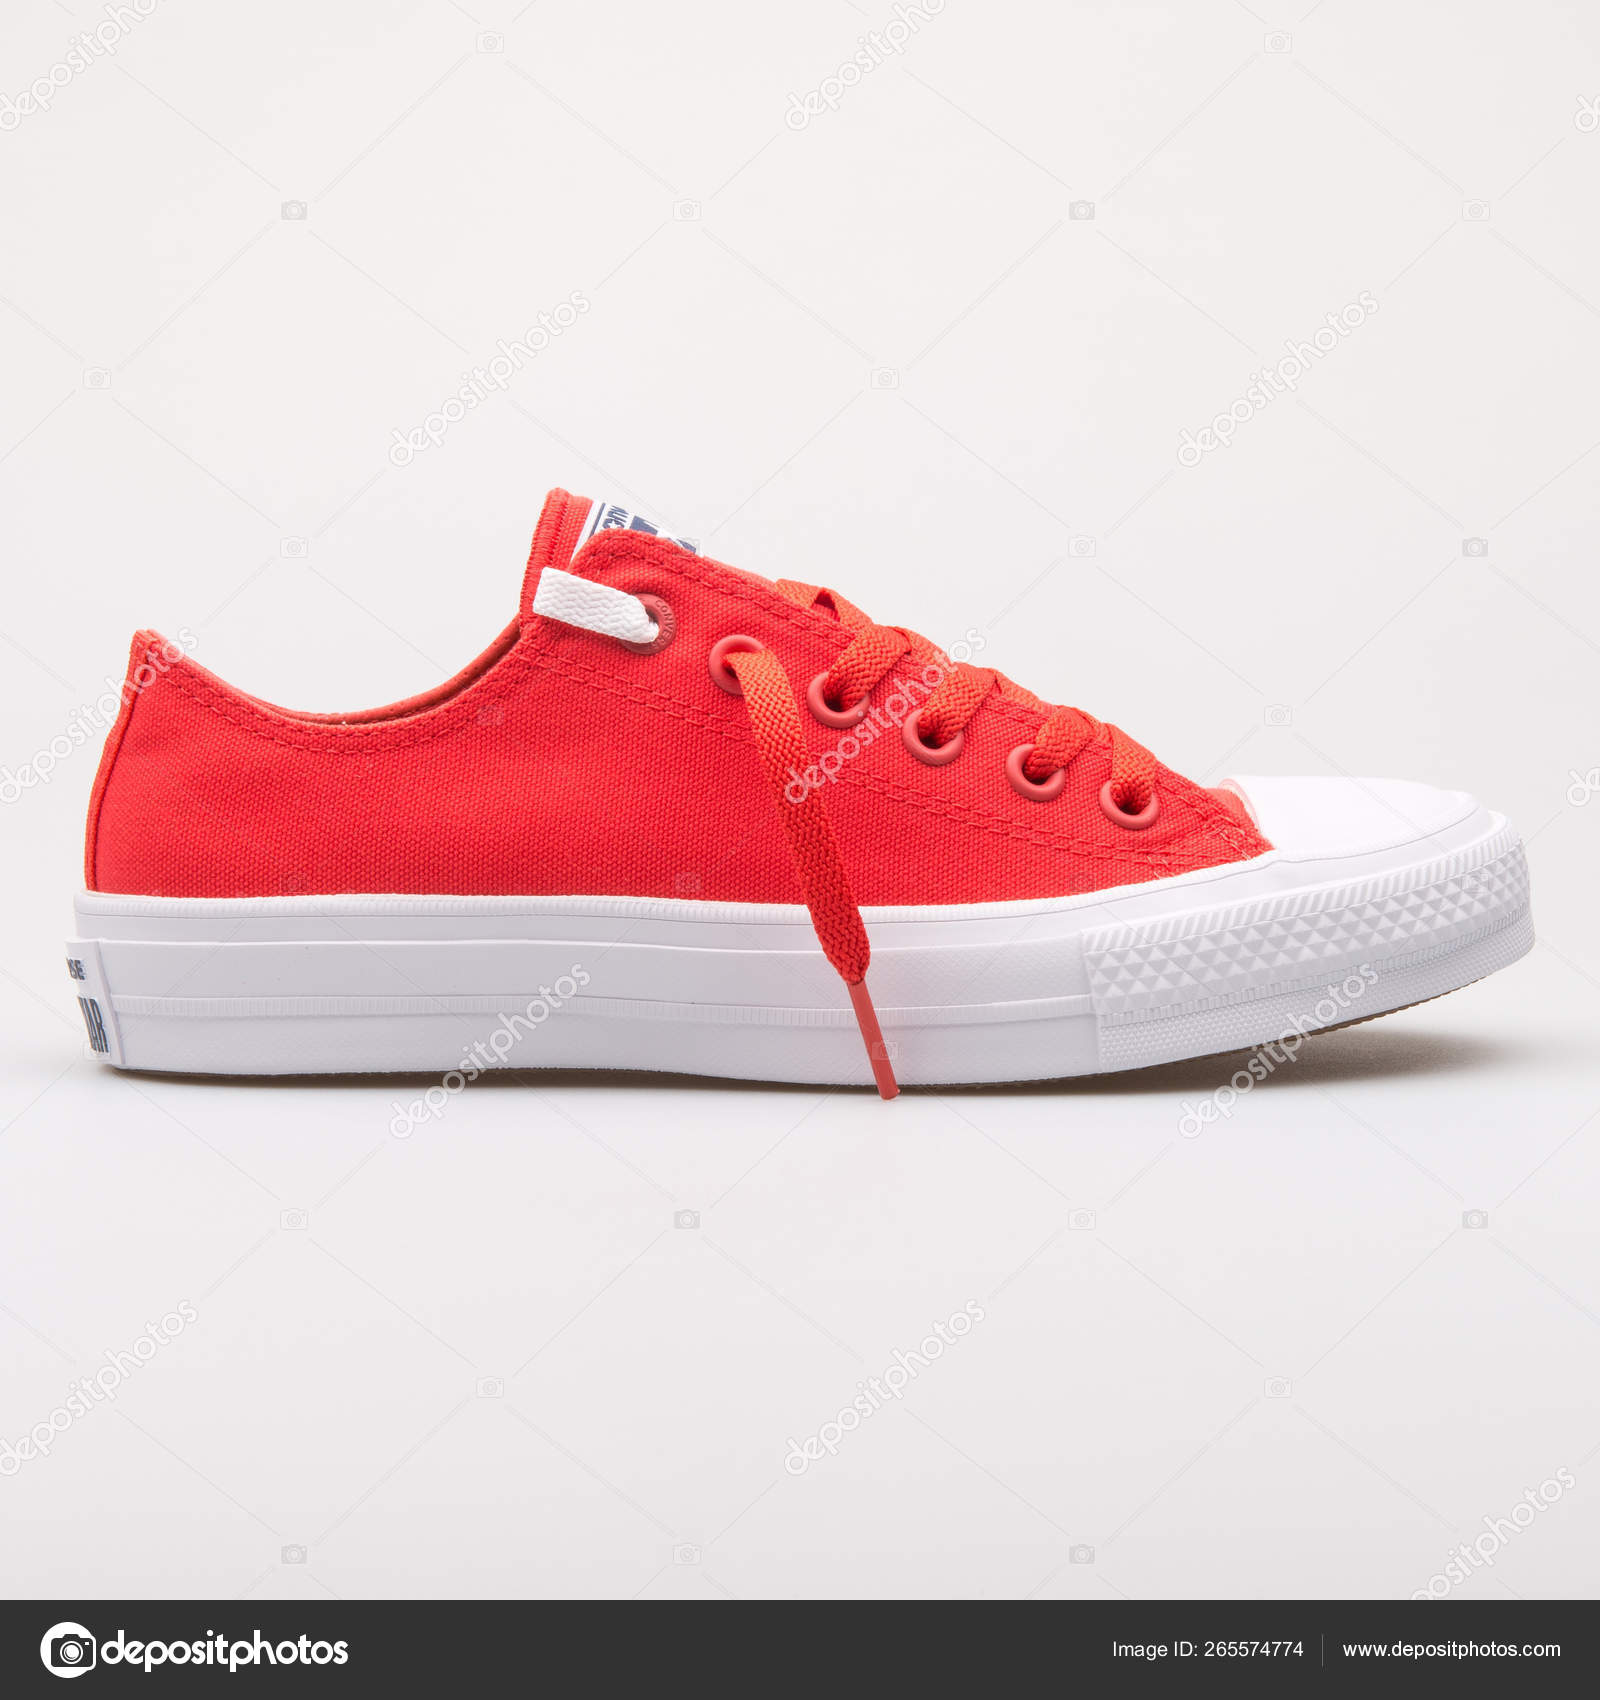 Converse Chuck Taylor All Star 2 OX red 